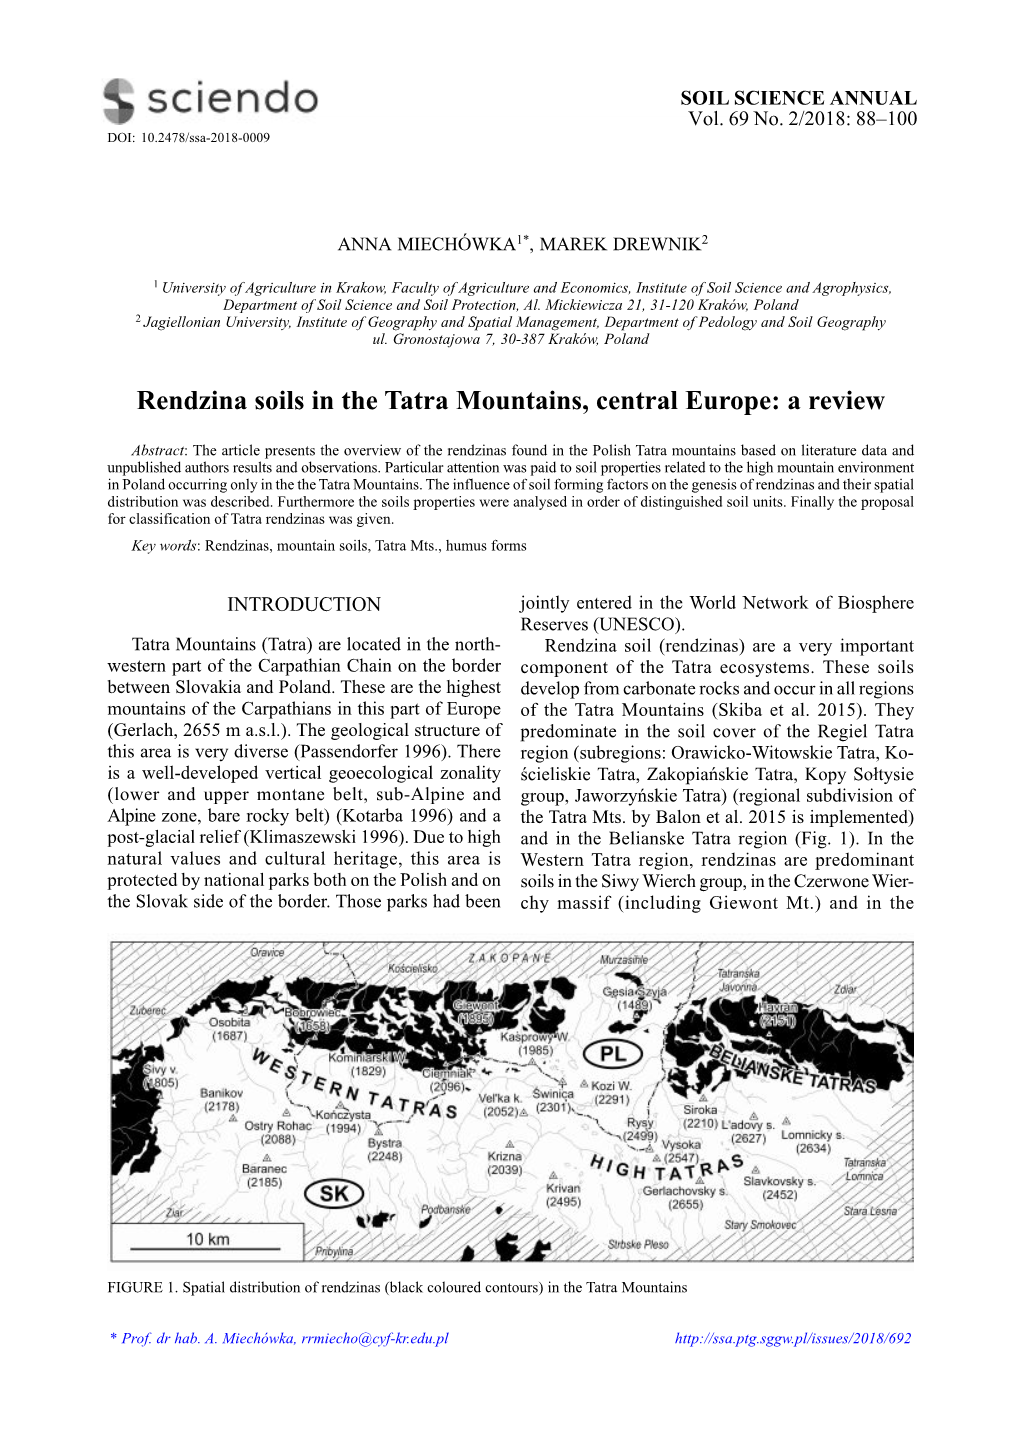 Rendzina Soils in the Tatra Mountains, Central Europe: a Review